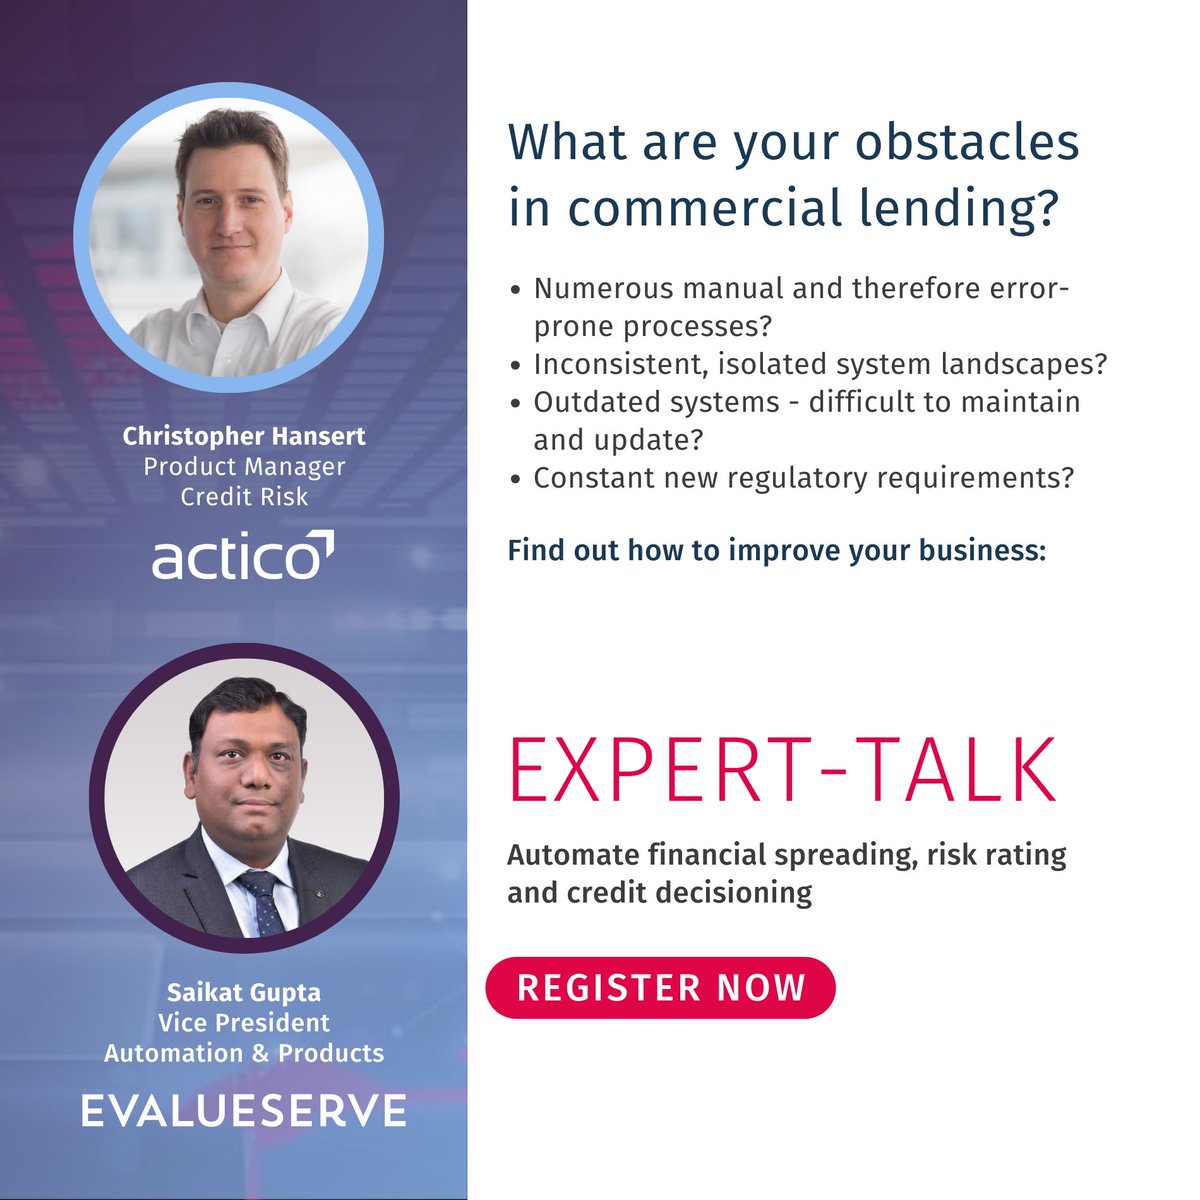 Register here to get immediate access: bit.ly/3xD7cvl

#lending #success #overcomeobstacles #financialindustry #expertinsights